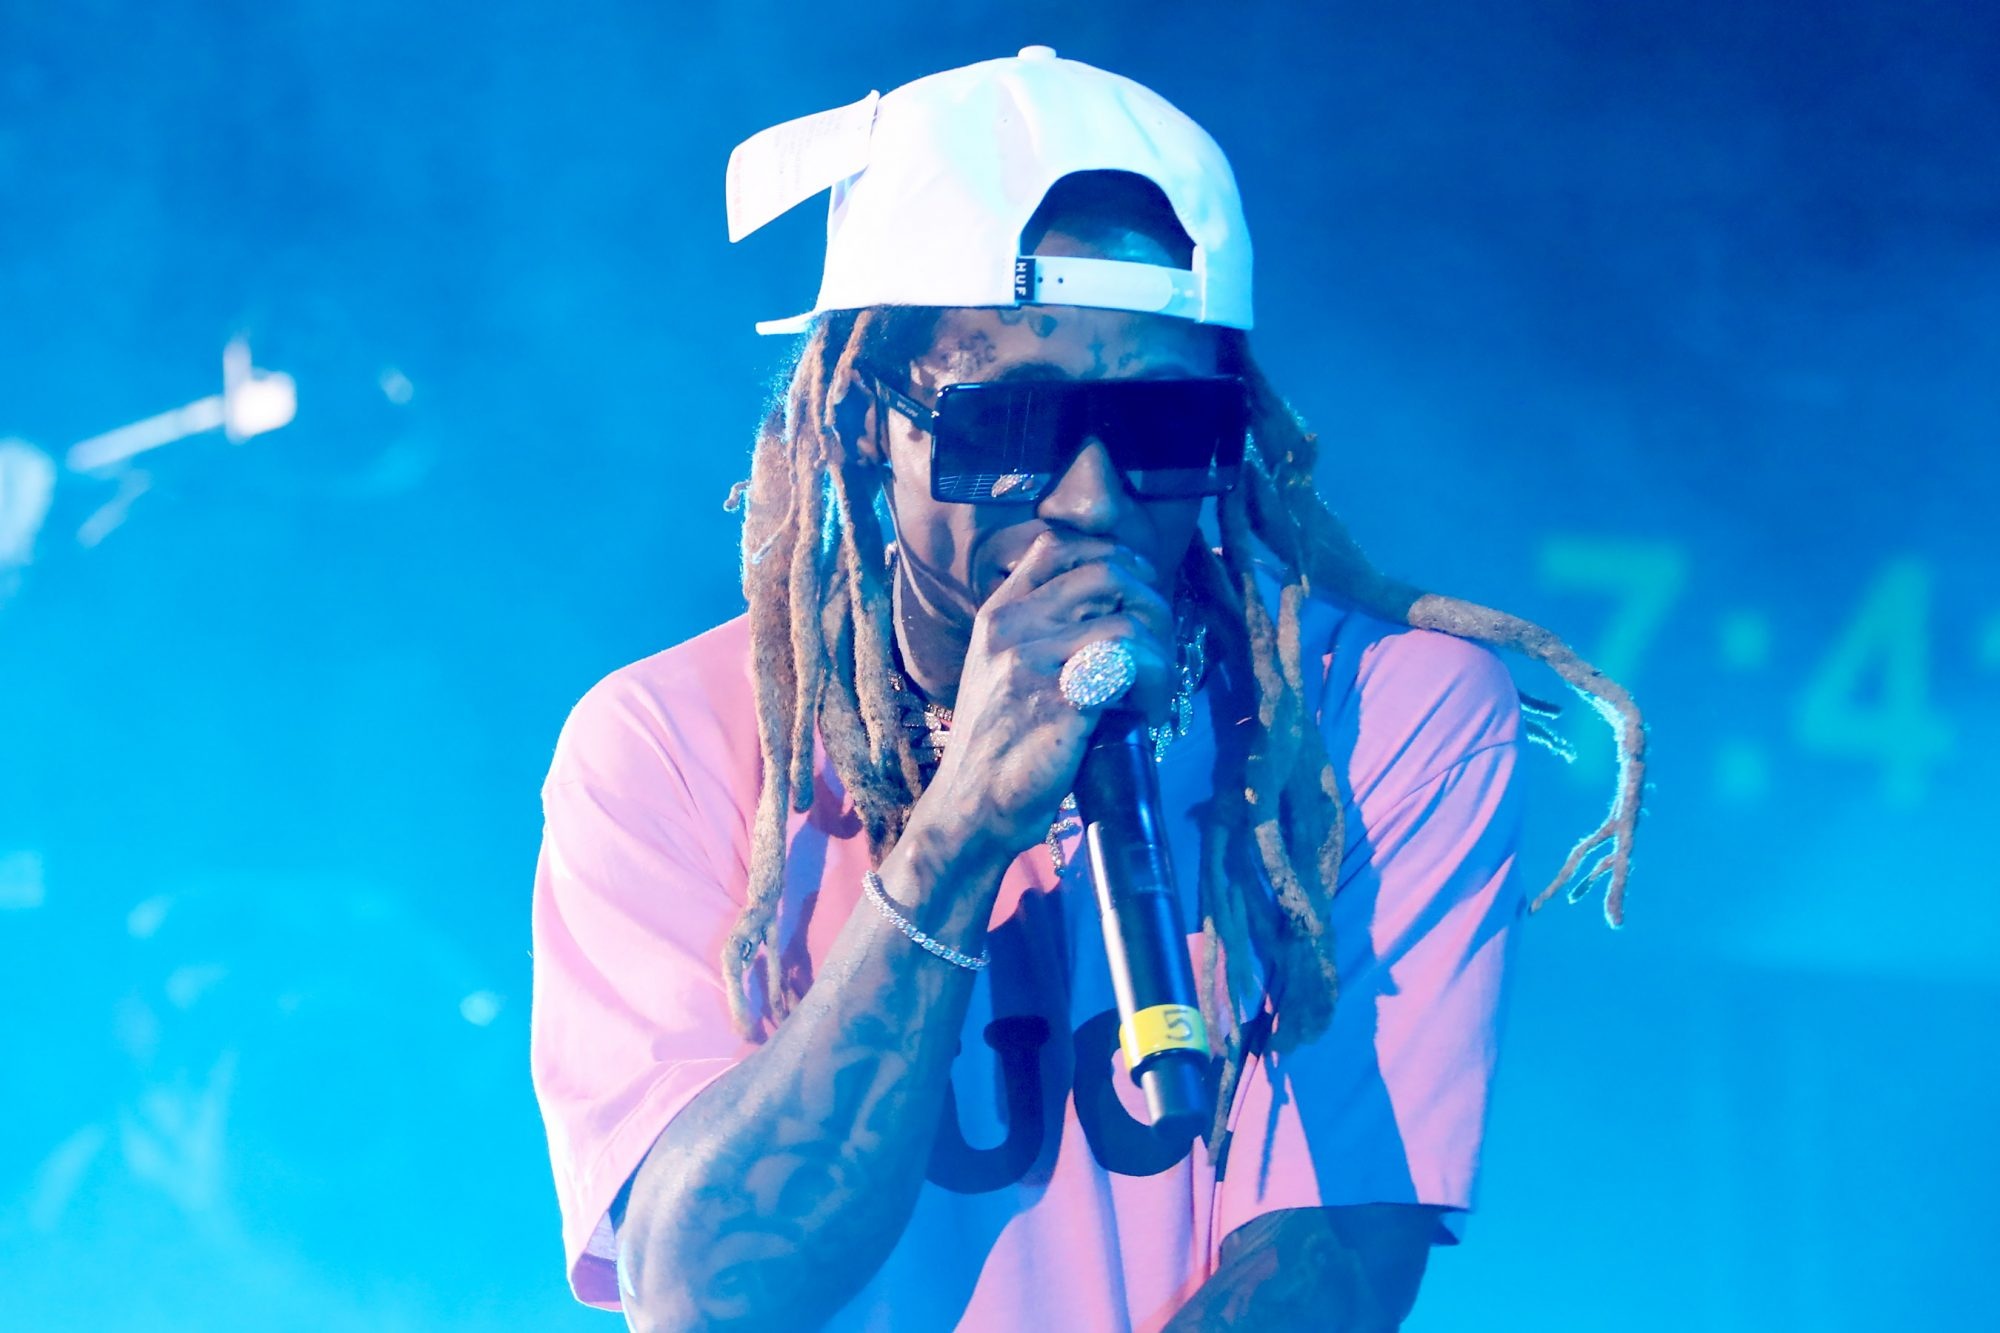 HD wallpaper, Desktop Hd Lil Wayne Background, Lil Wayne, 2000X1340 Hd Desktop, Controversial Exclusion, Musical Contributions, Grammy Disappointment